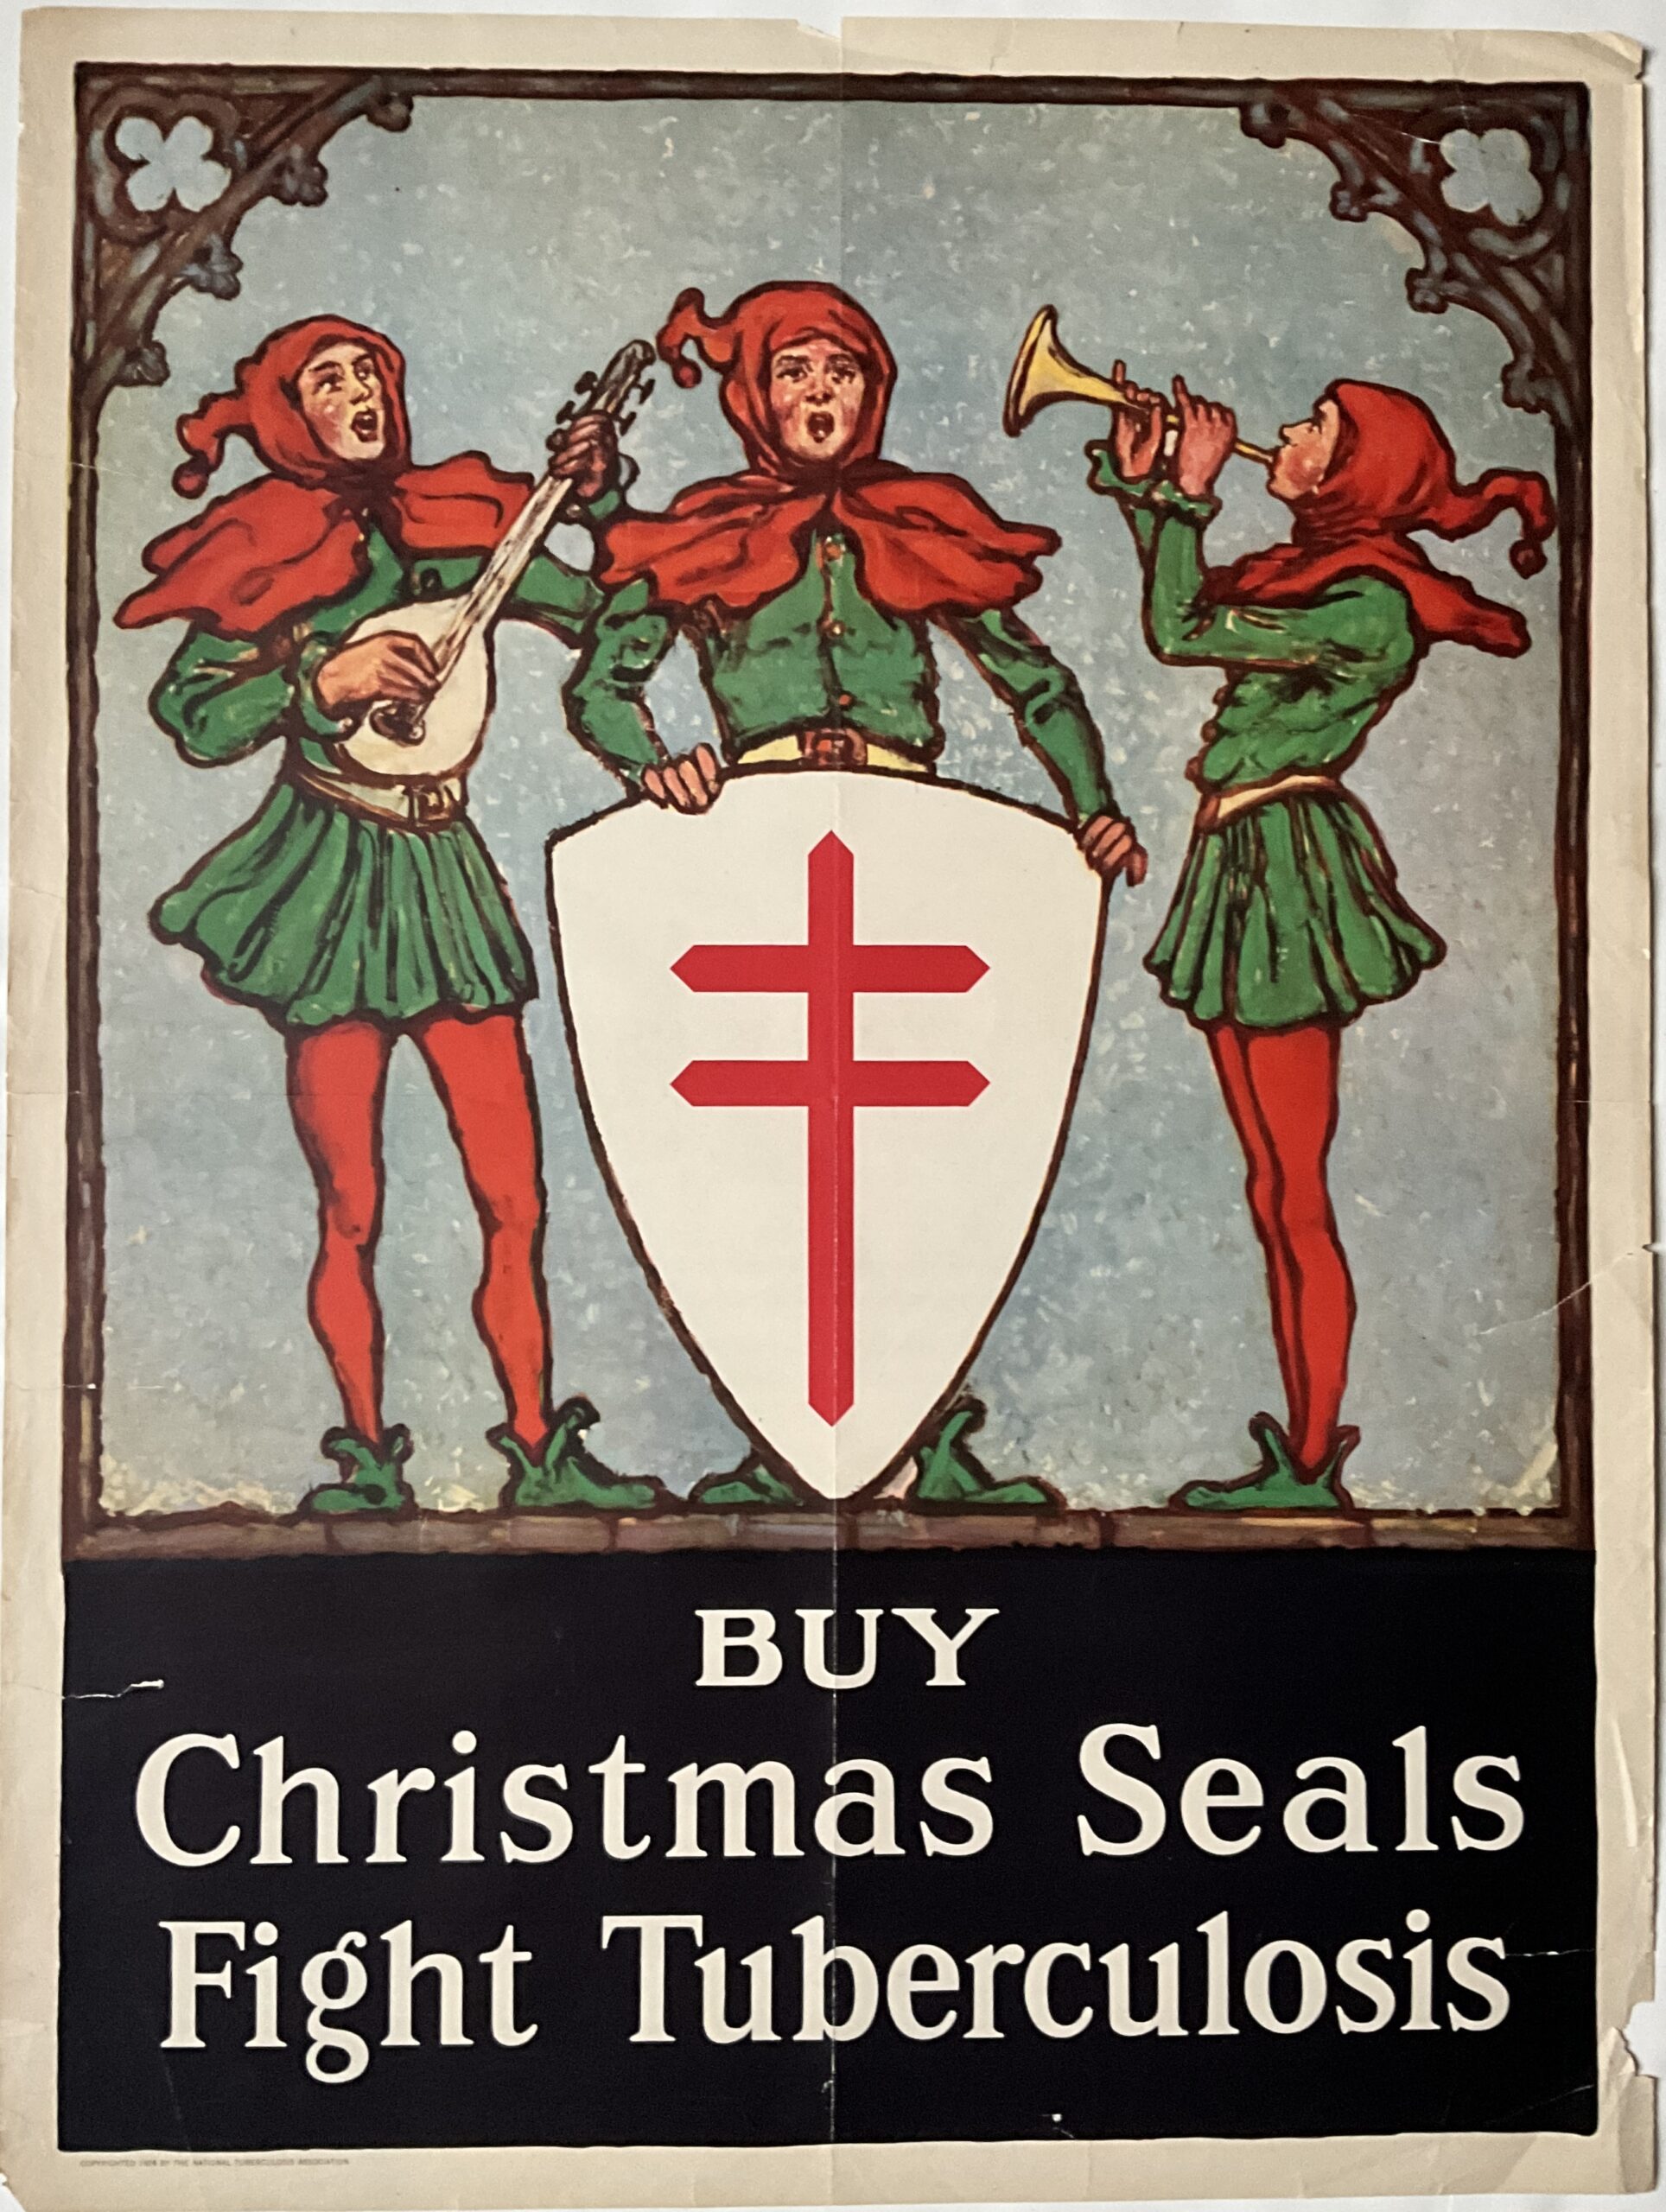 ST11	TB MEDIEVAL BELL RINGERS “BUY CHRISTMAS SEALS FIGHT TUBERCULOSIS”